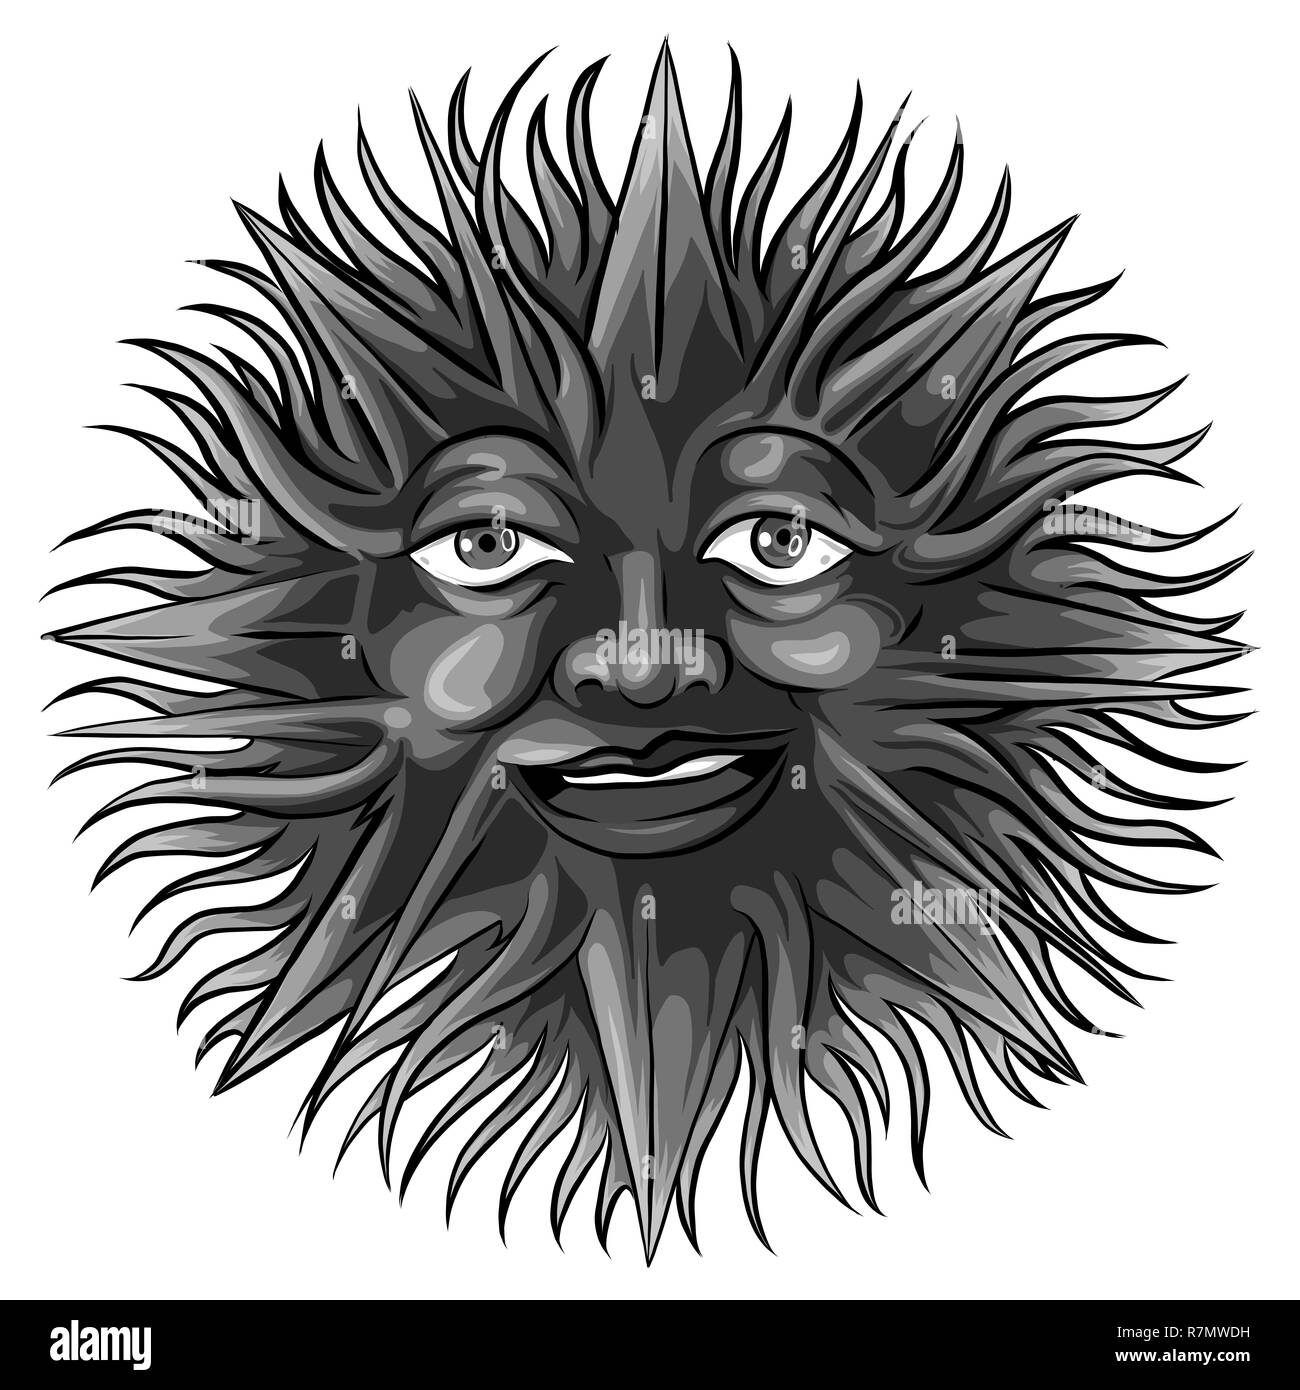 Sun with a face in ethnic style. Astrological symbol. Abstract image of the planet. Tribal print, tattoo. Stock Photo